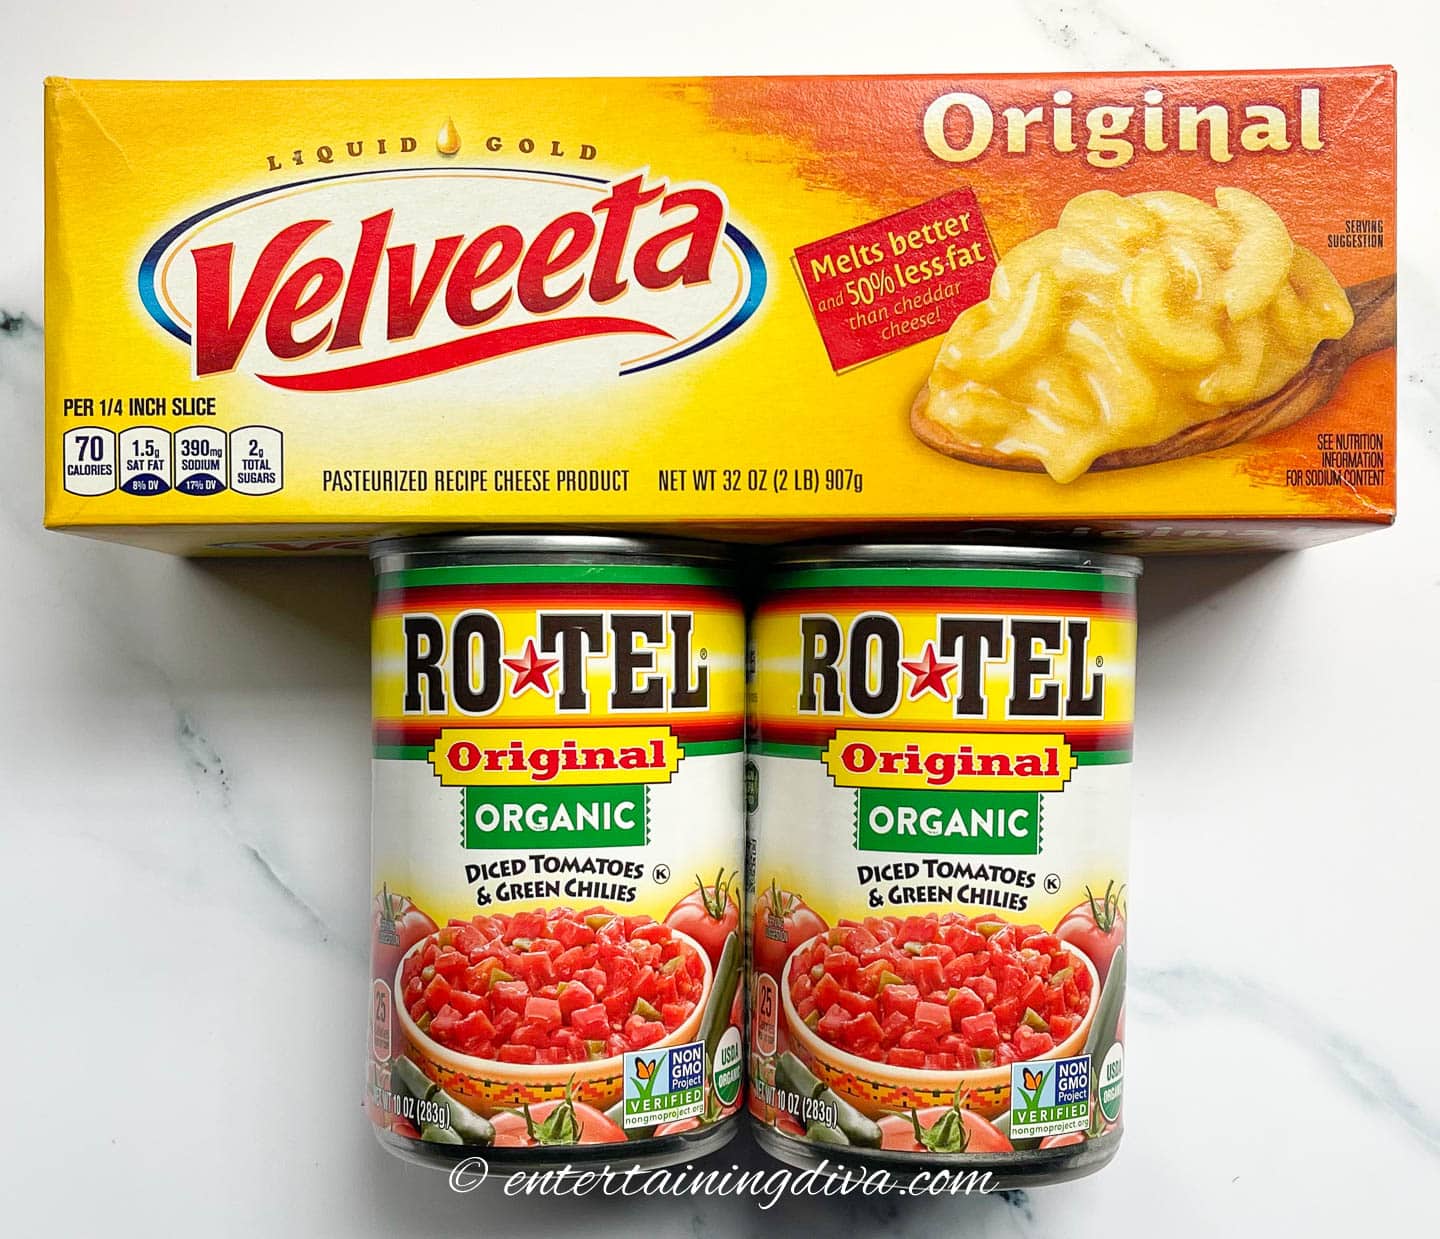 A package of Velveeta and two cans of Rotel